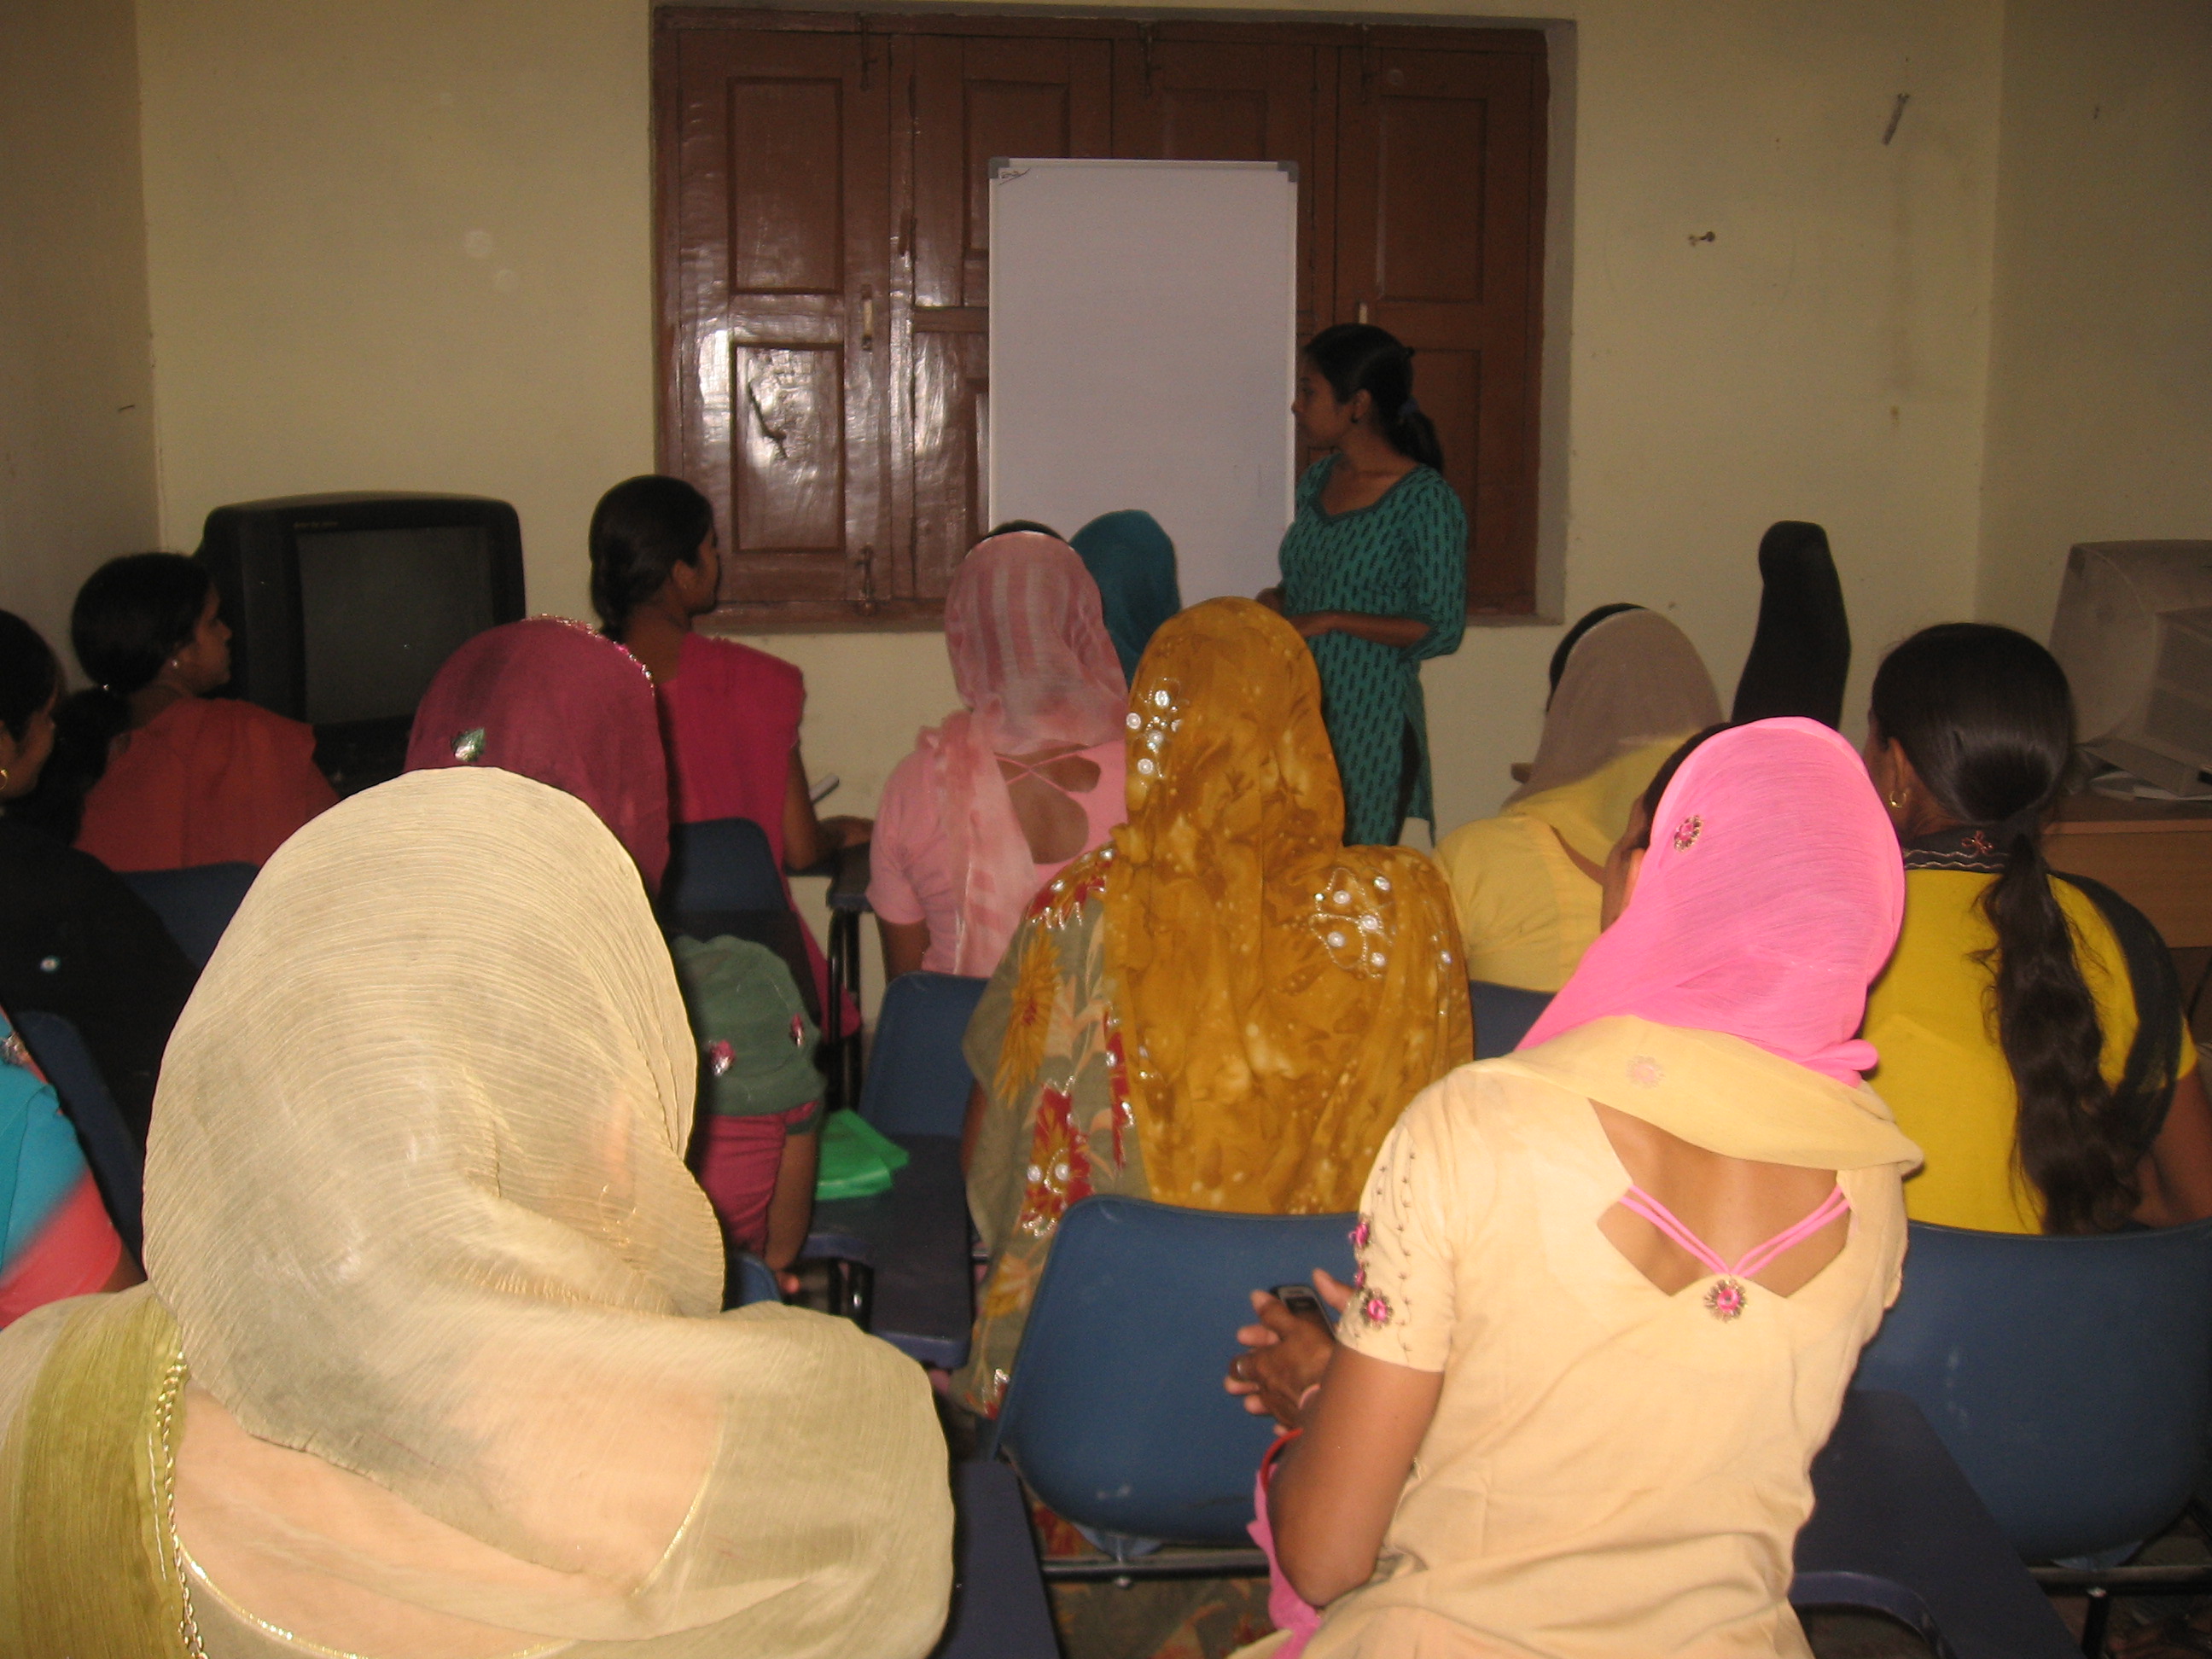 Women of Tikli and Aklimpur villages in Haryana attending a training session. (Credit: Hemlata AithaniWFS)